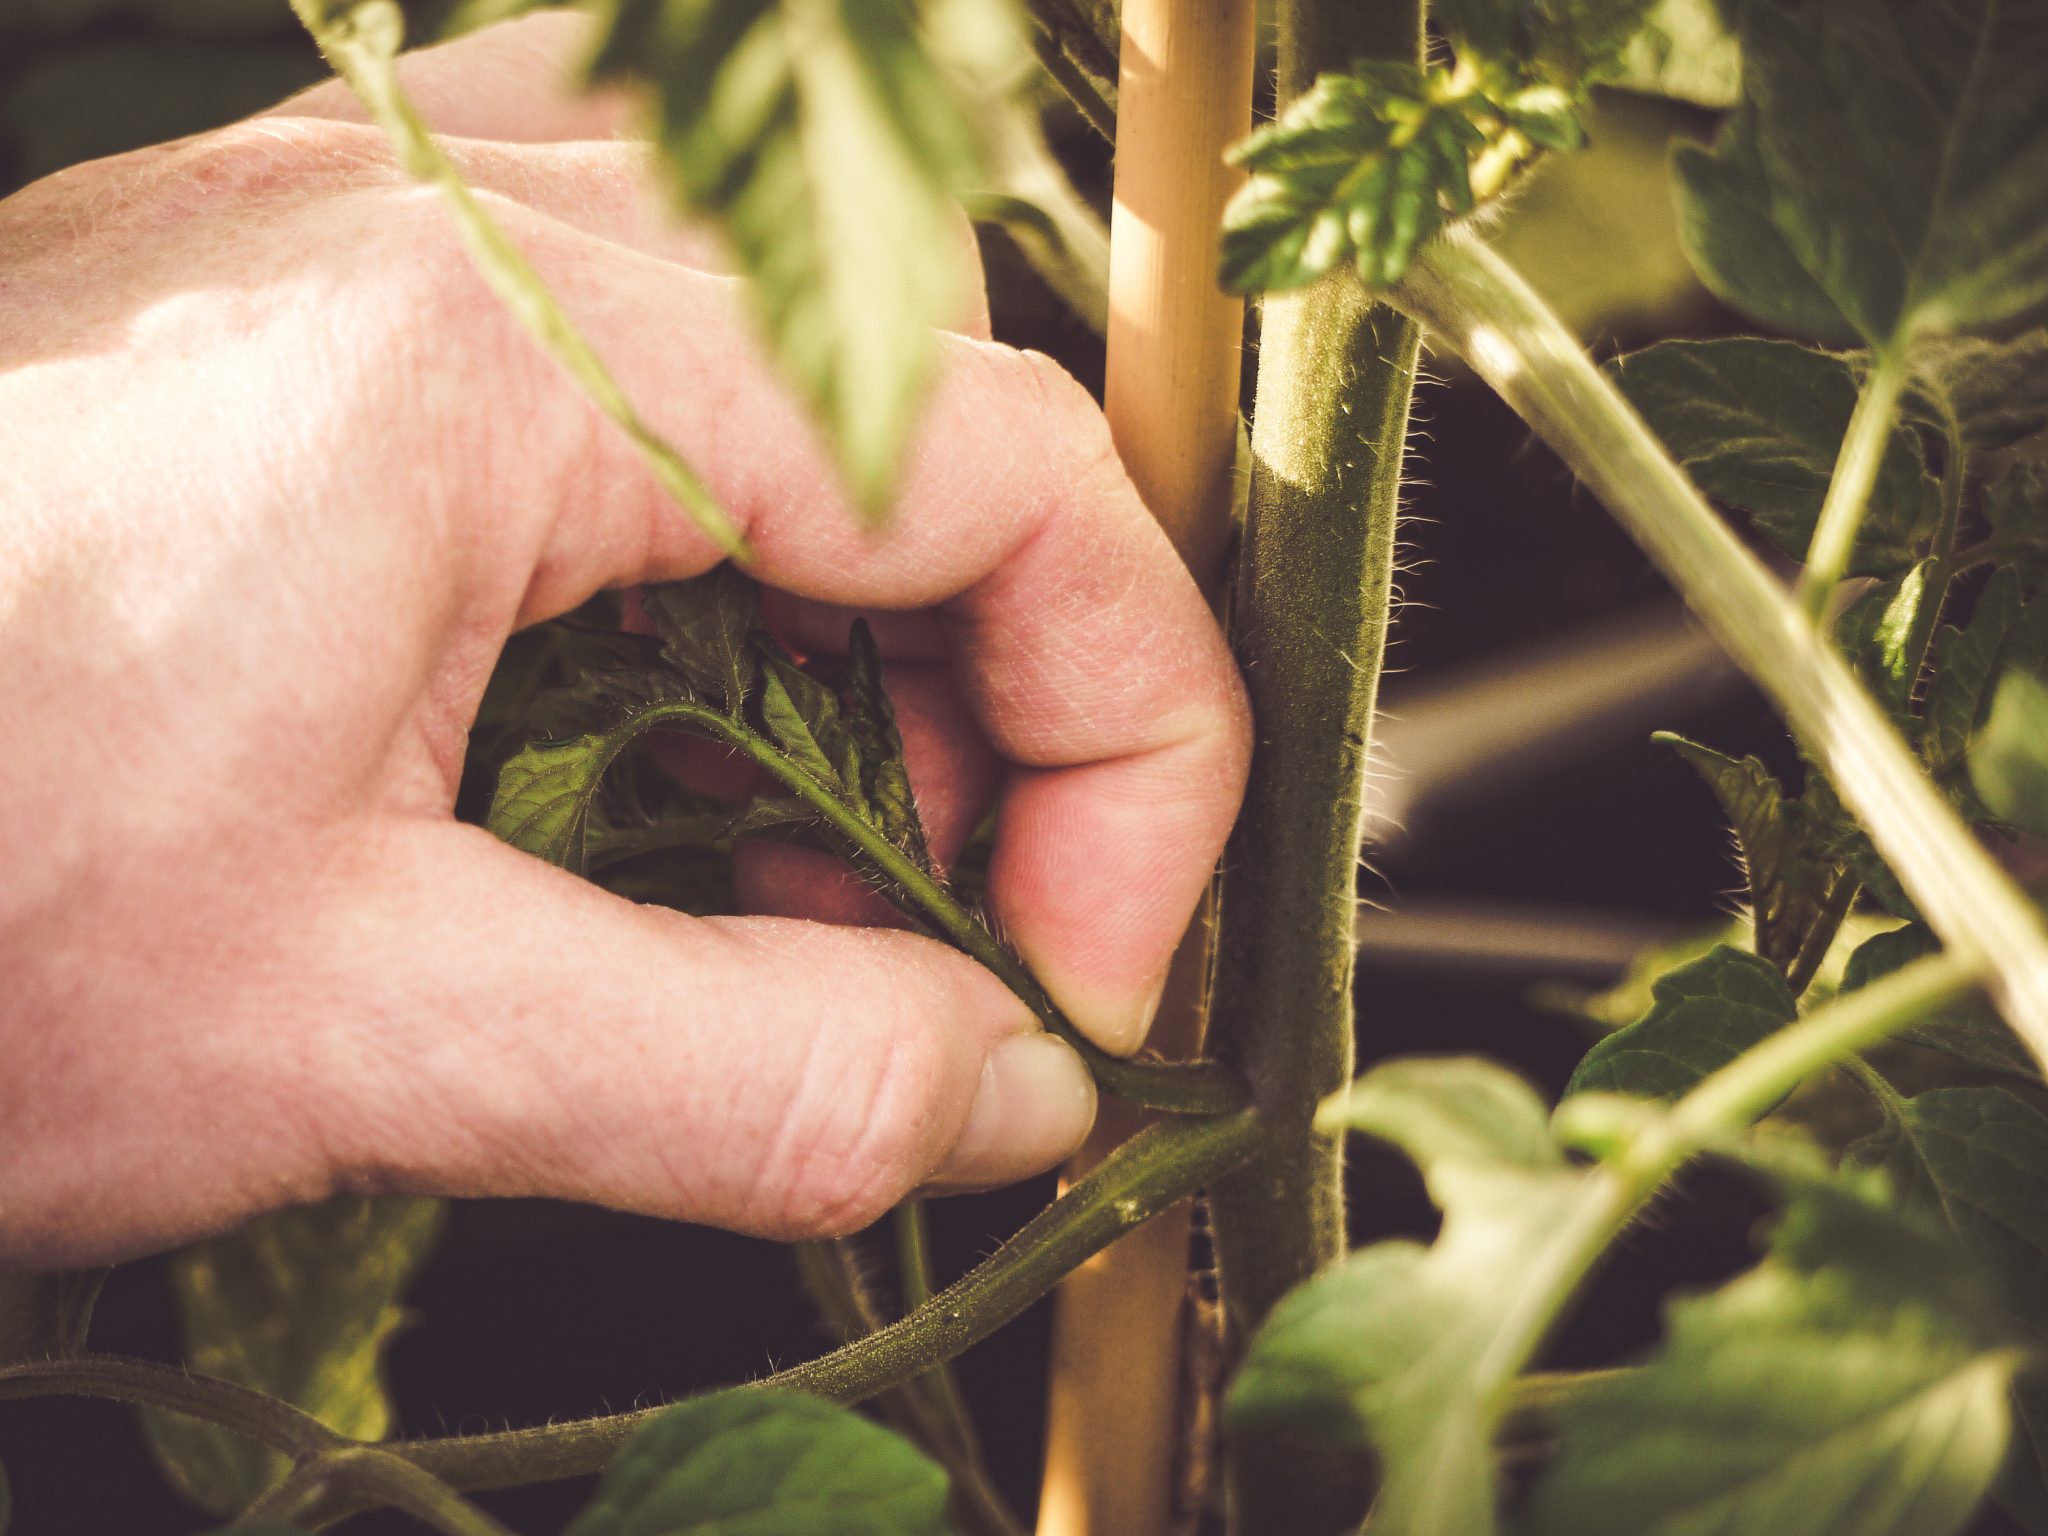 Pruning a tomato plant